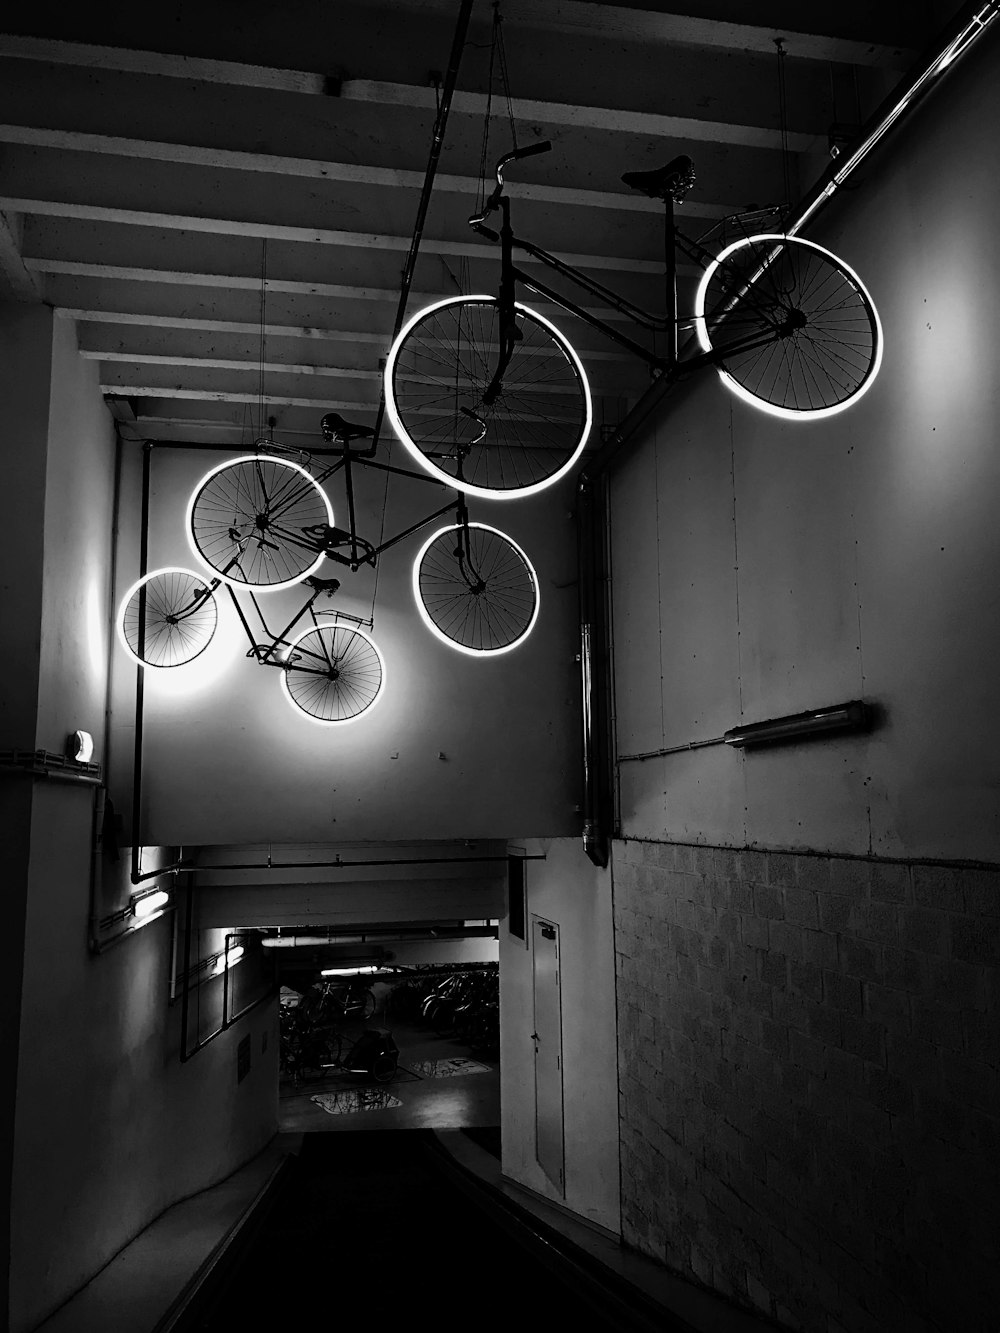 Classic Bikes With Lighted Wheels Hanging On Ceiling Photo